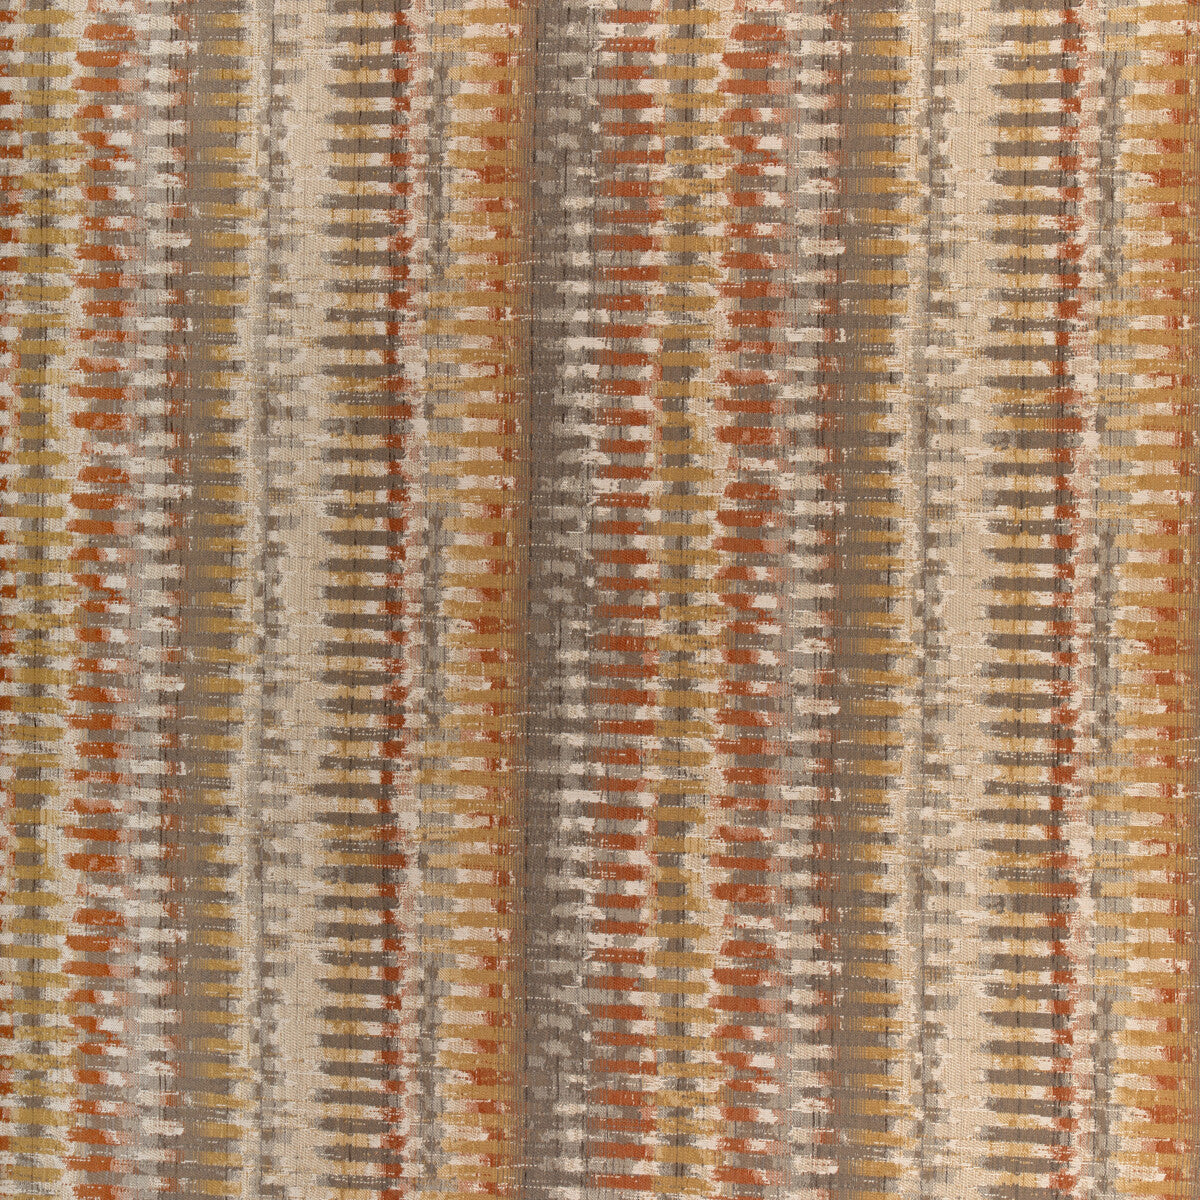 Kravet Design fabric in 37131-412 color - pattern 37131.412.0 - by Kravet Design in the Woven Colors collection